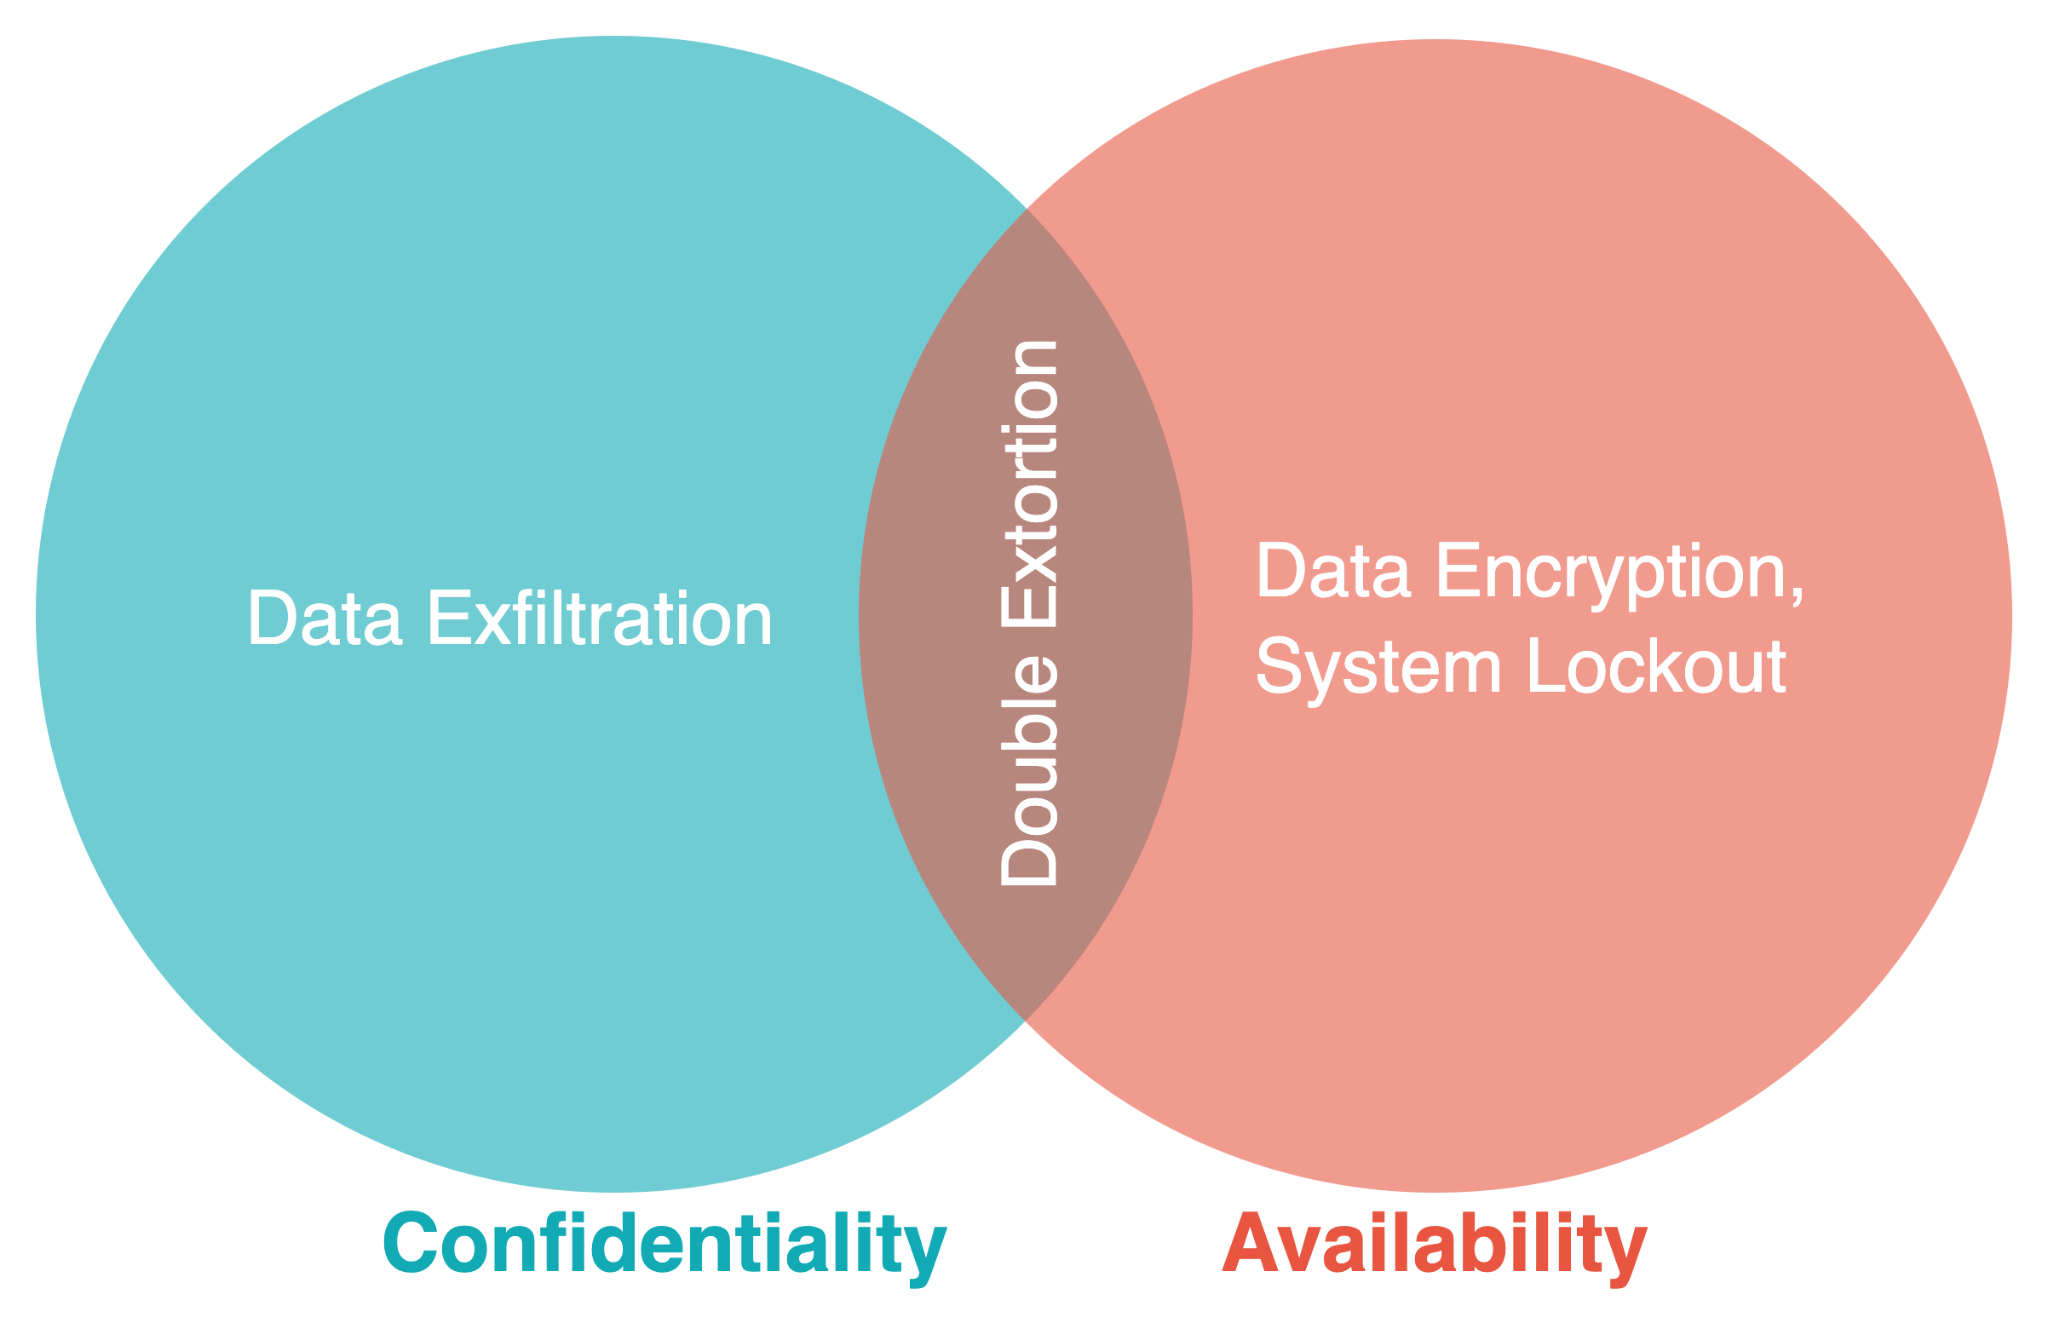 Ransomware impacts confidentiality (shown in blue circle) and availability (shown in red circle). Confidentiality impacts can include data exfiltration, and availability impacts can include data encryption or system lockout, as shown in the figure. The overlap of the two circles represents double extortion, when both types of impacts are involved. 